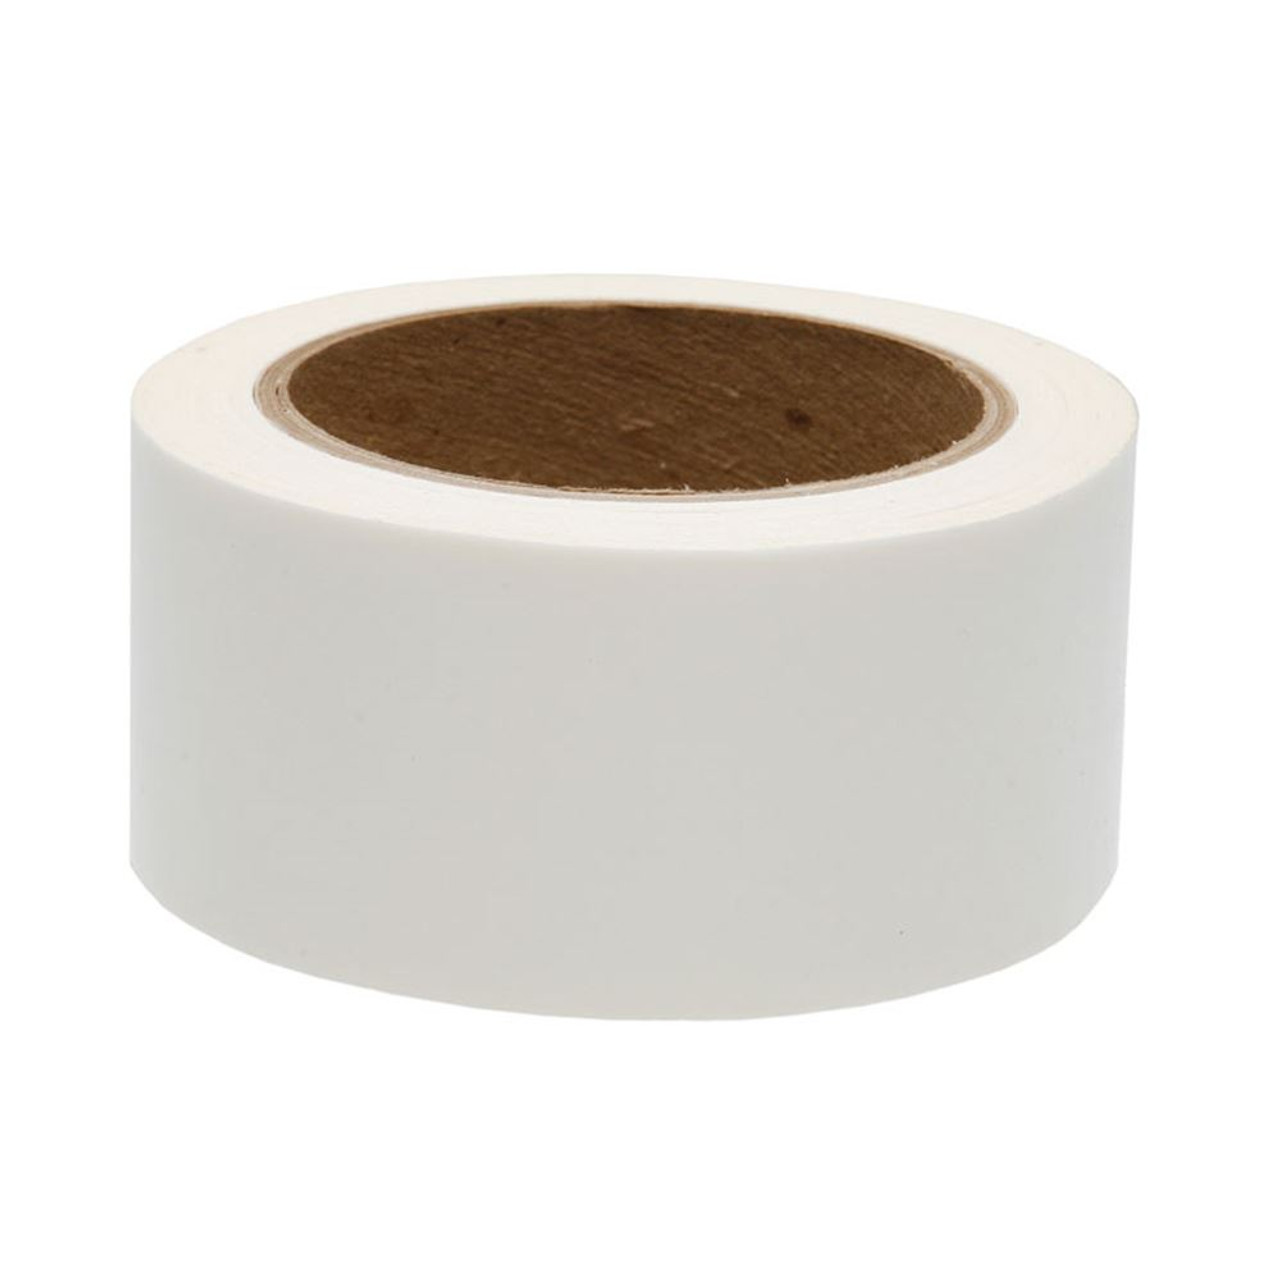 Spectape - Double Sided Tape, 2 x 36 Yards